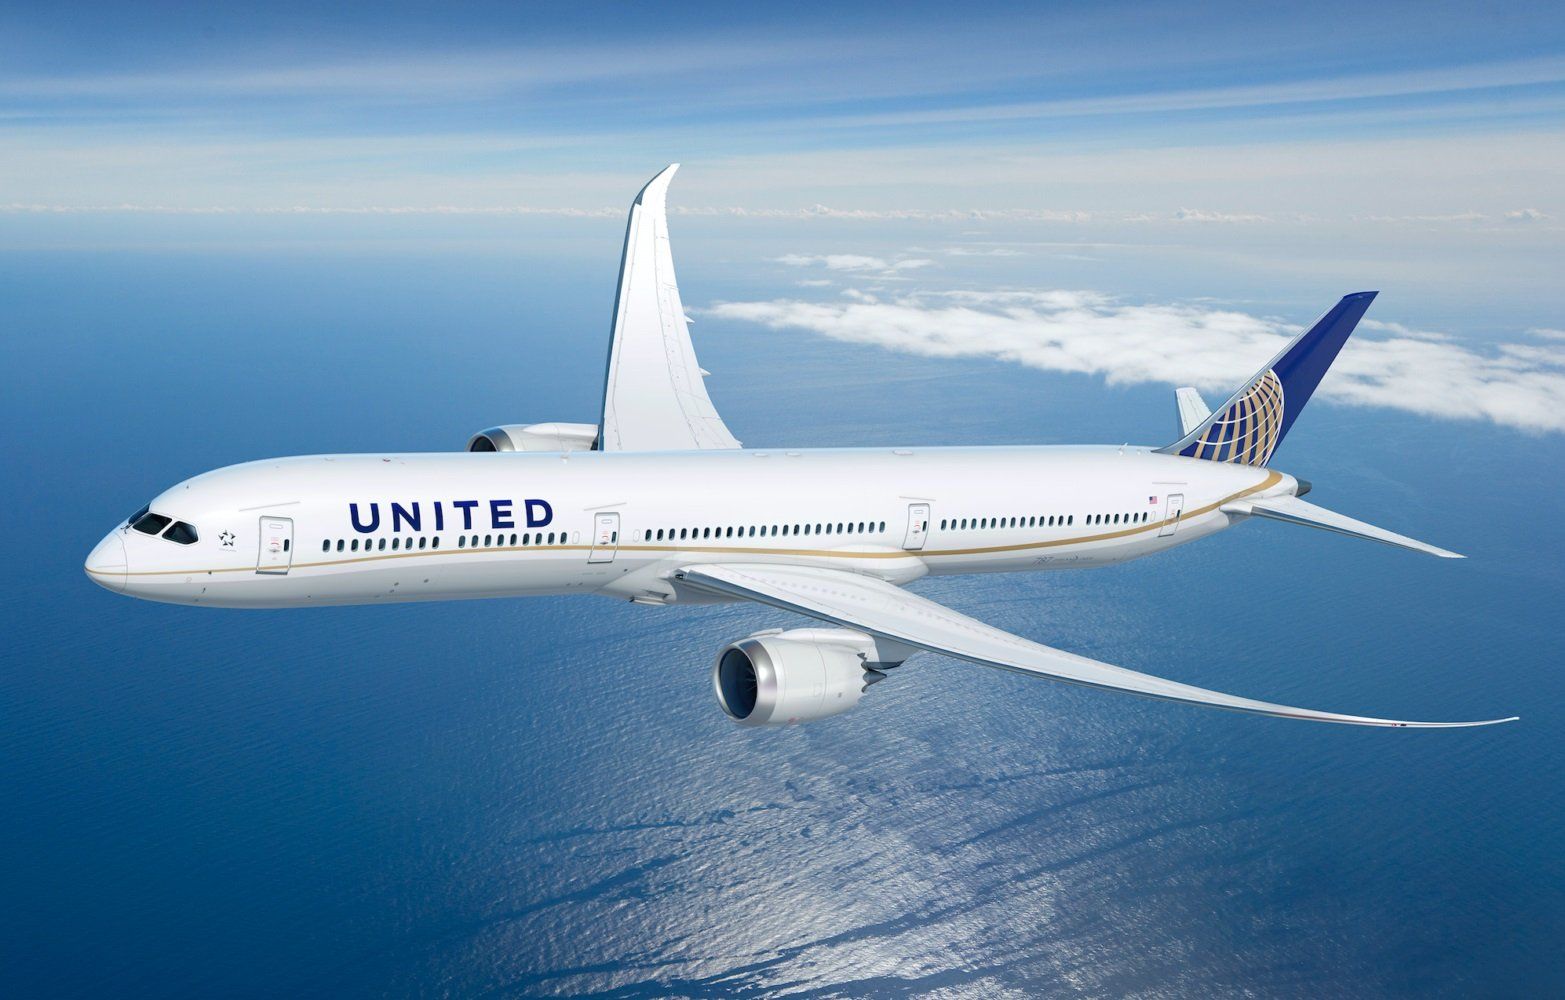 United announces year-round nonstop Cape Town flights from New York/Newark